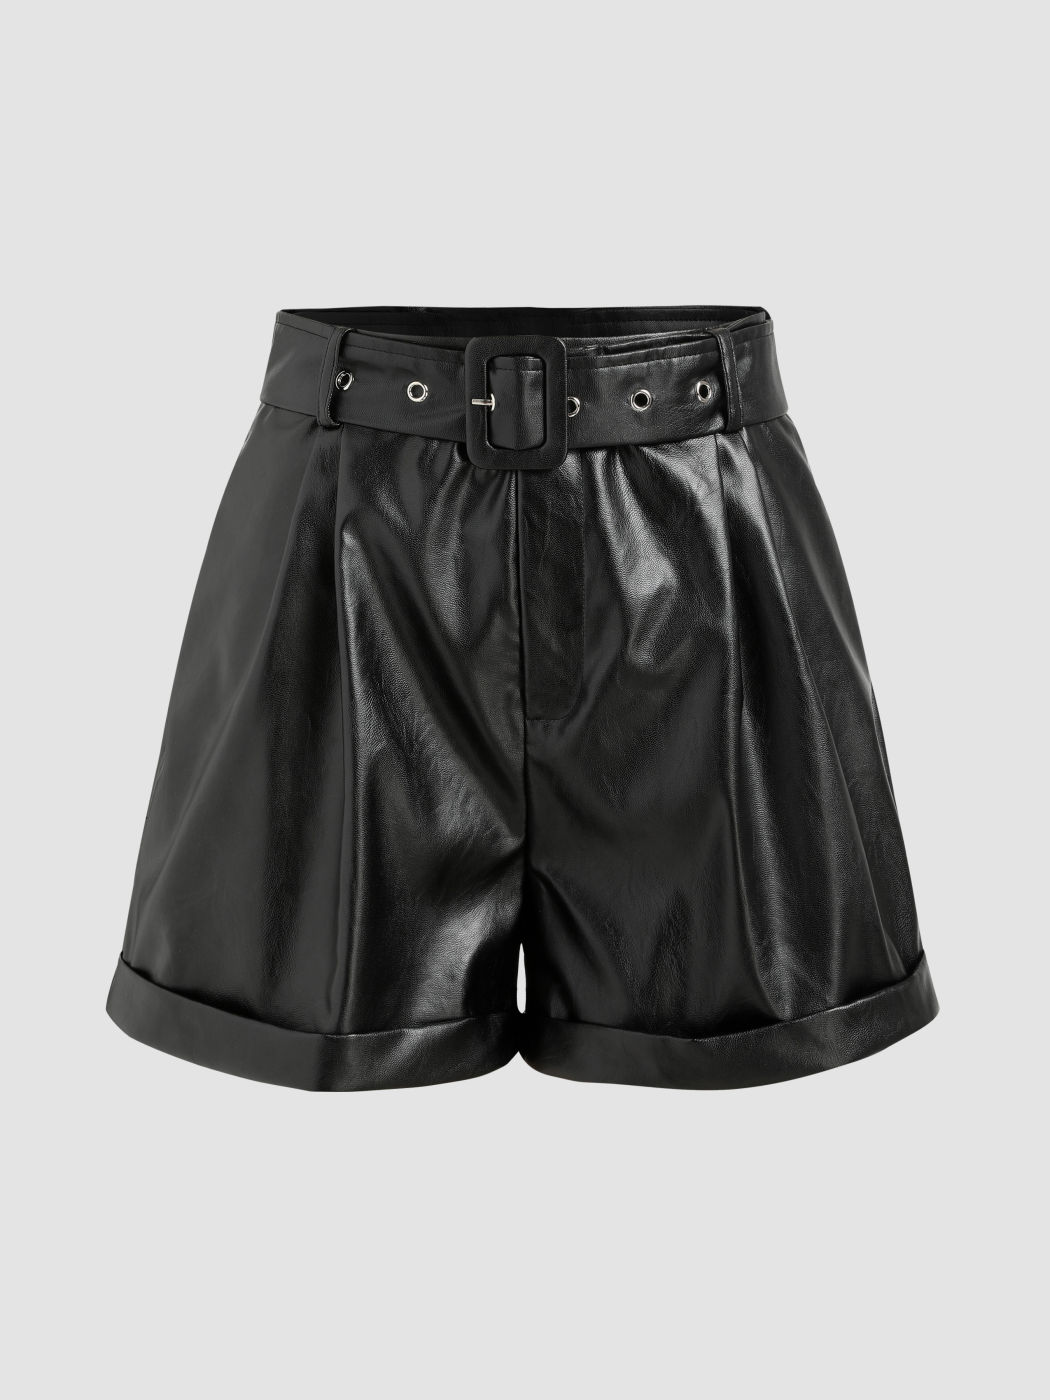 PU Solid Shorts With Belt For Music Festival/Live House Party/Clubbing ...